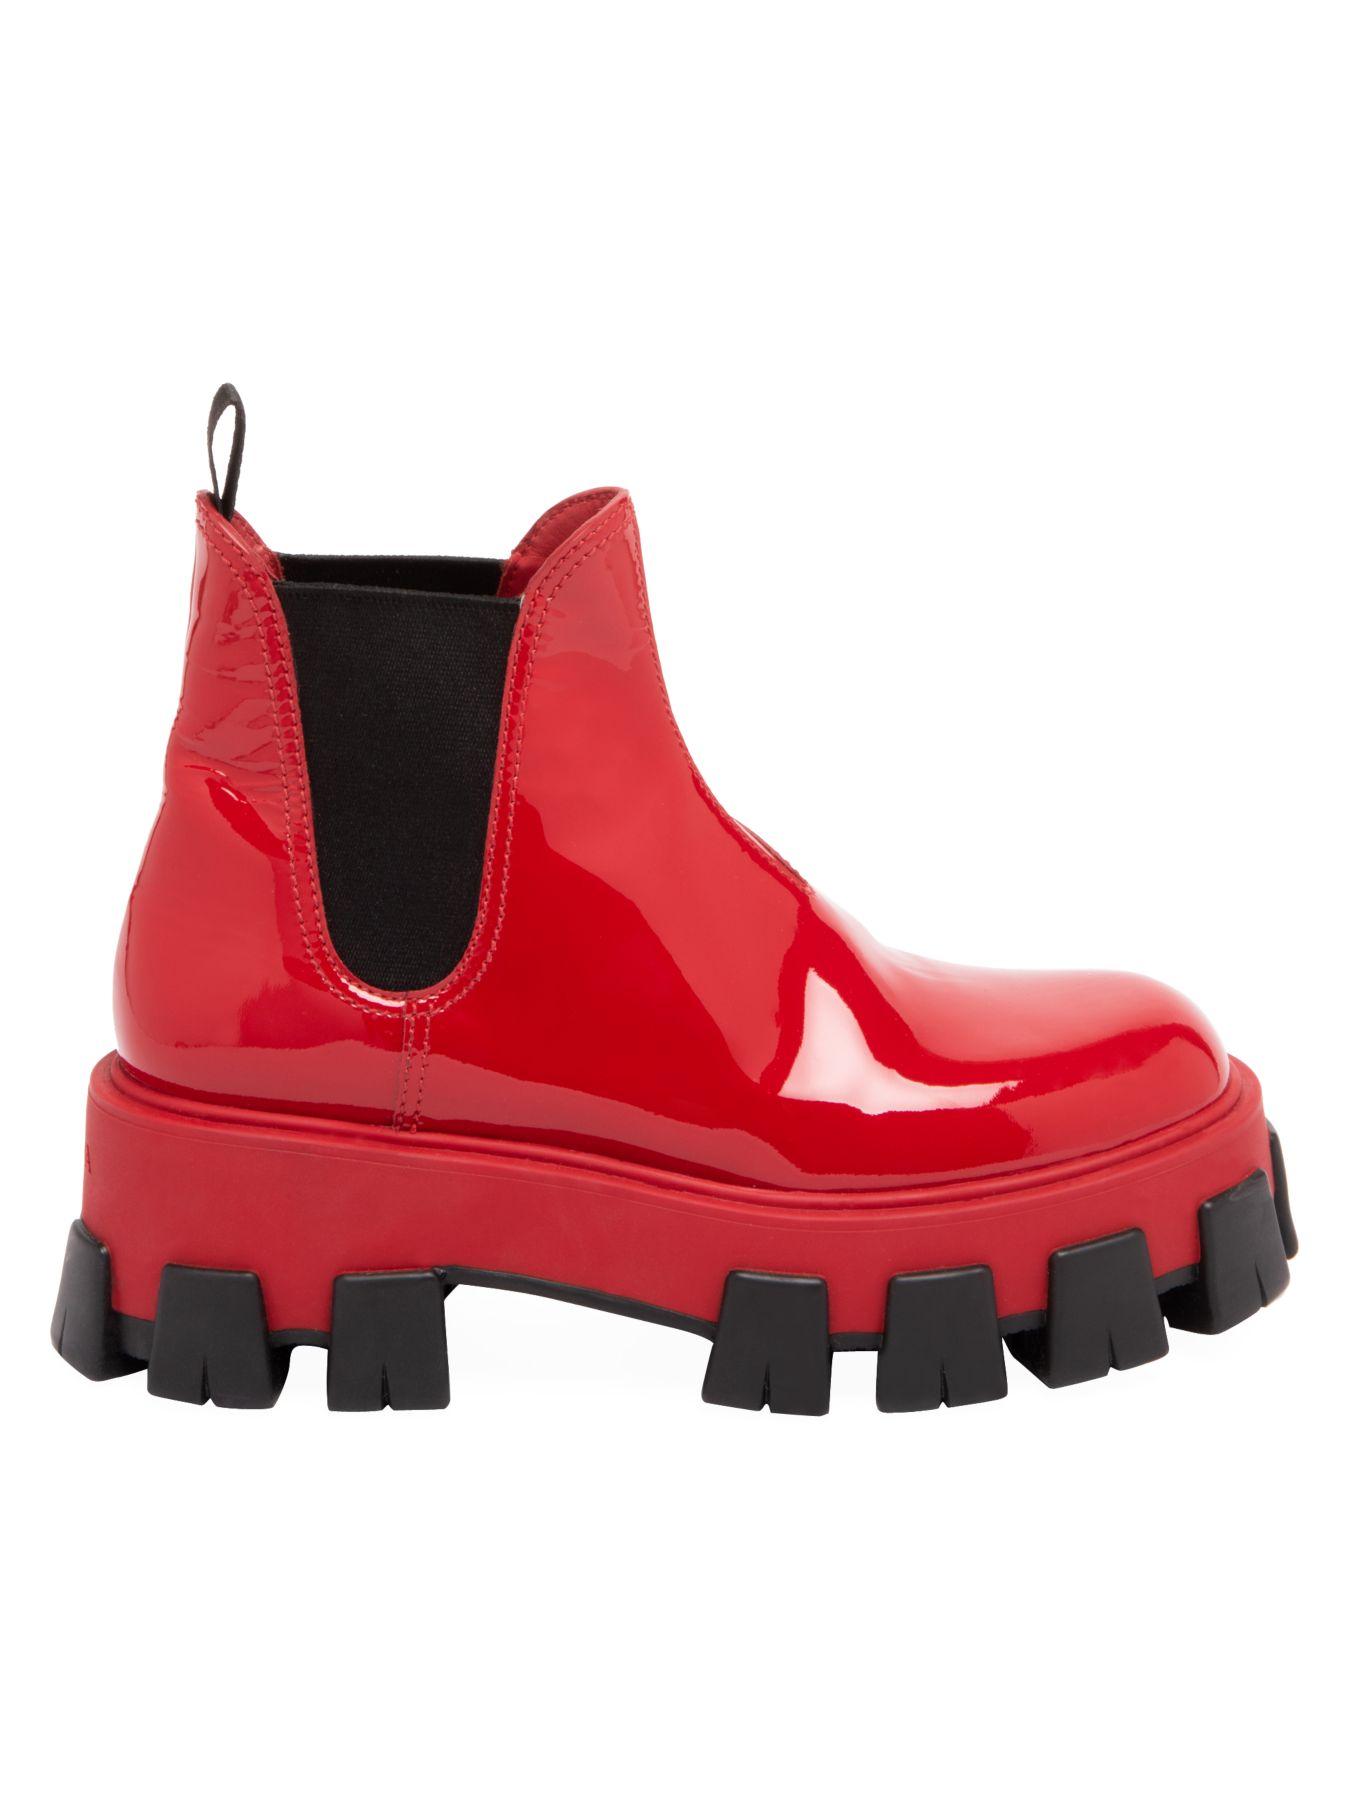 Prada Lug-sole Patent Leather Chelsea Boots in Red - Lyst